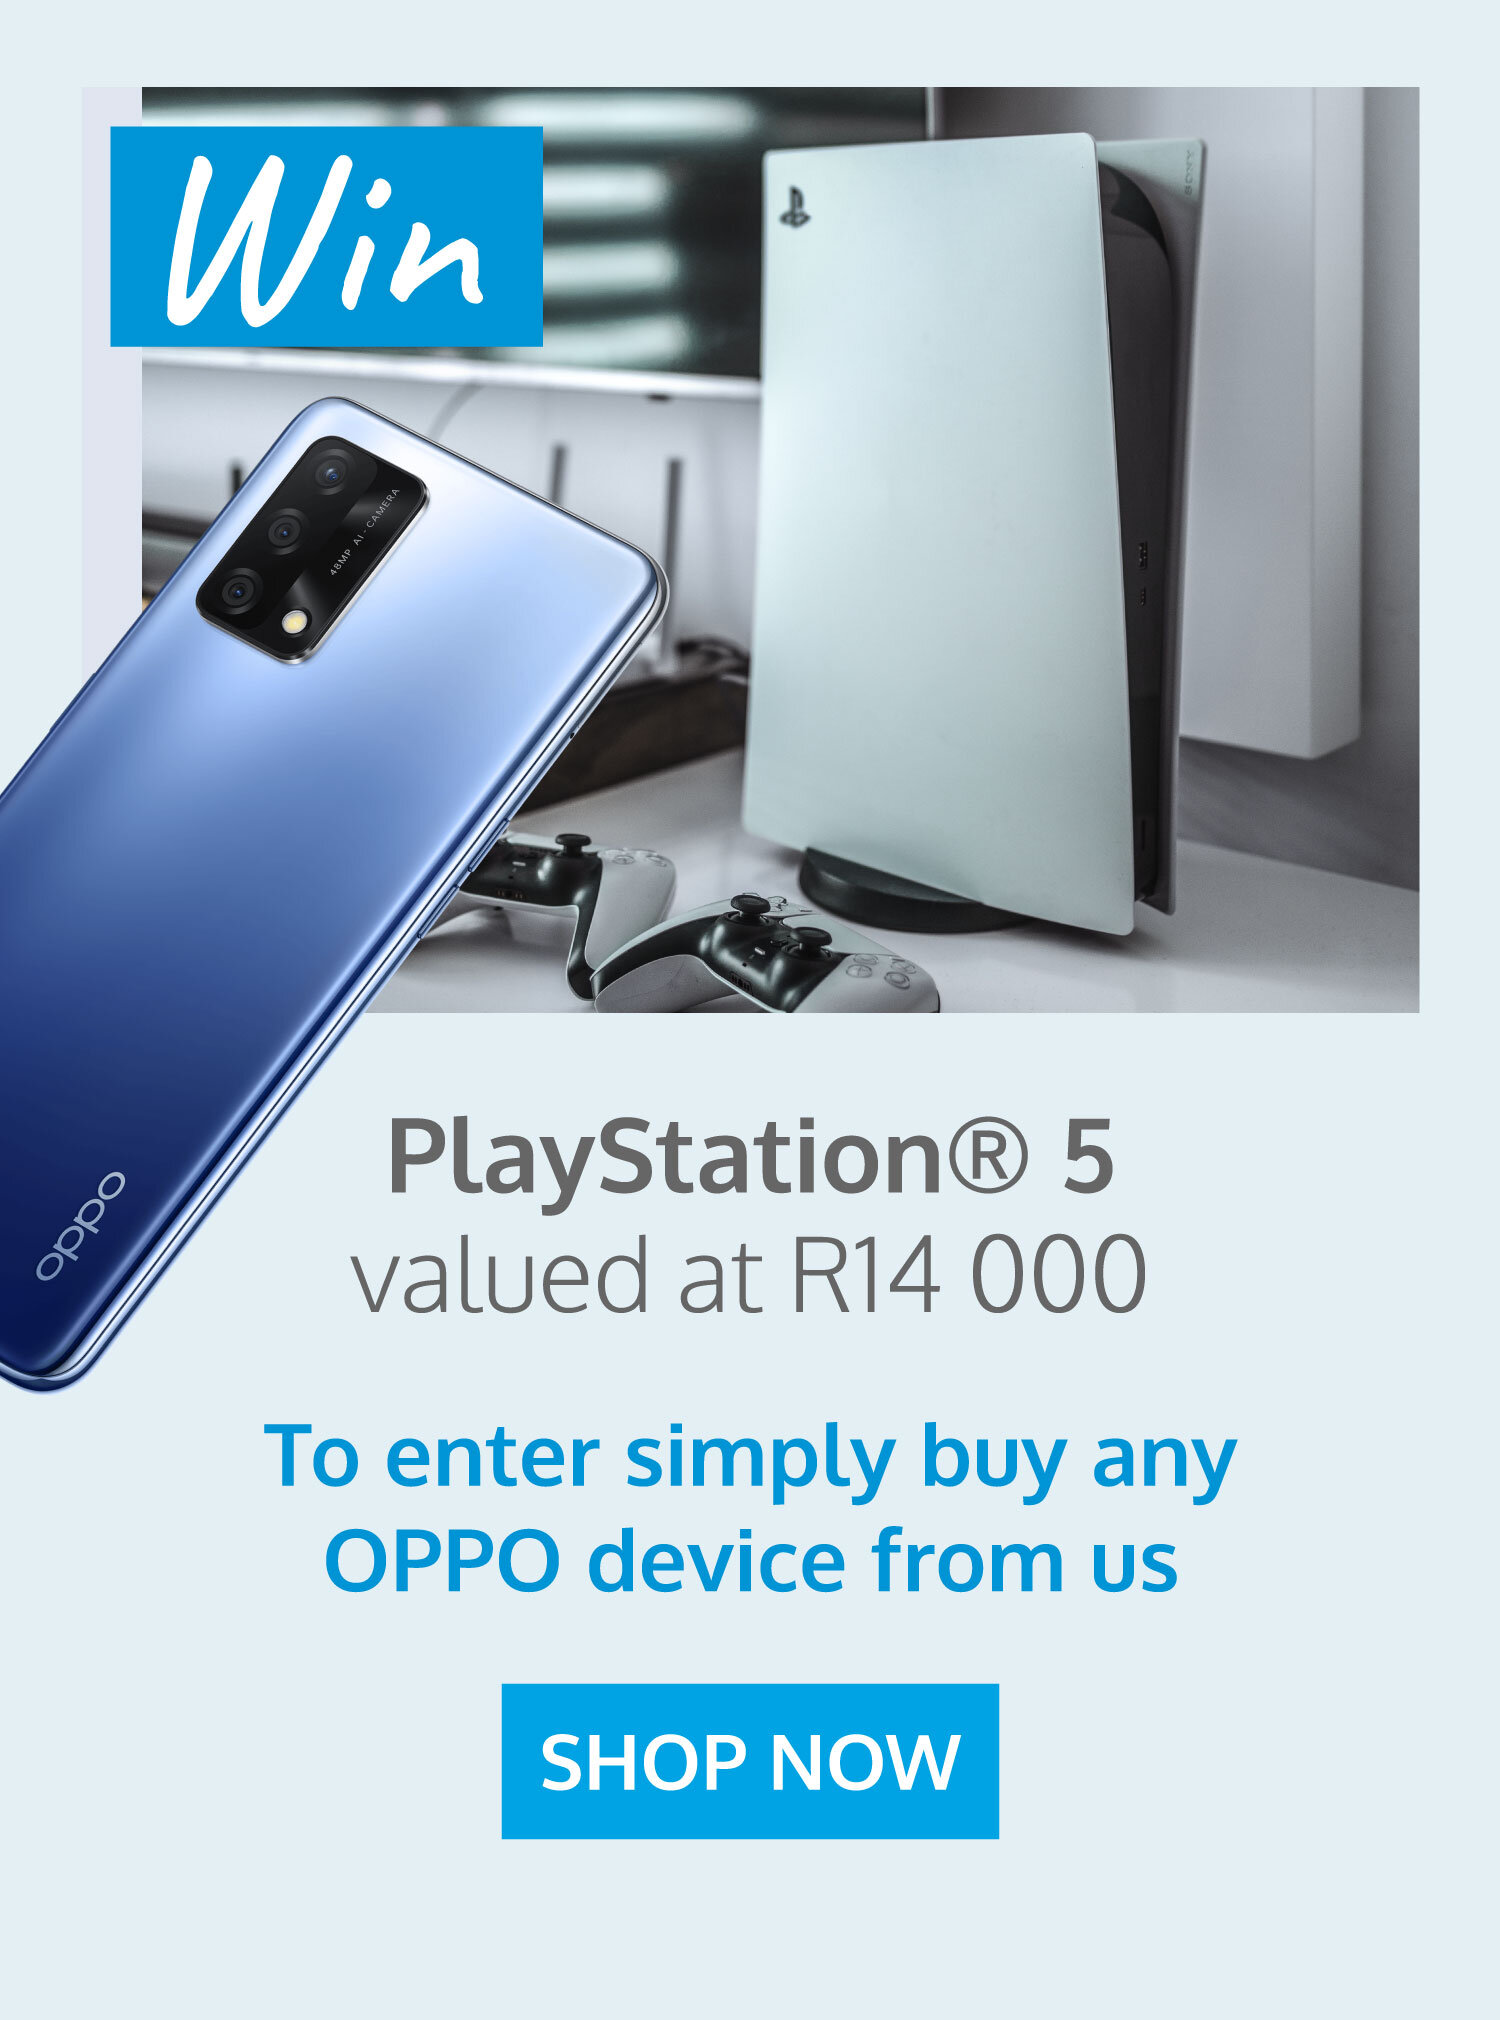 oppo competition